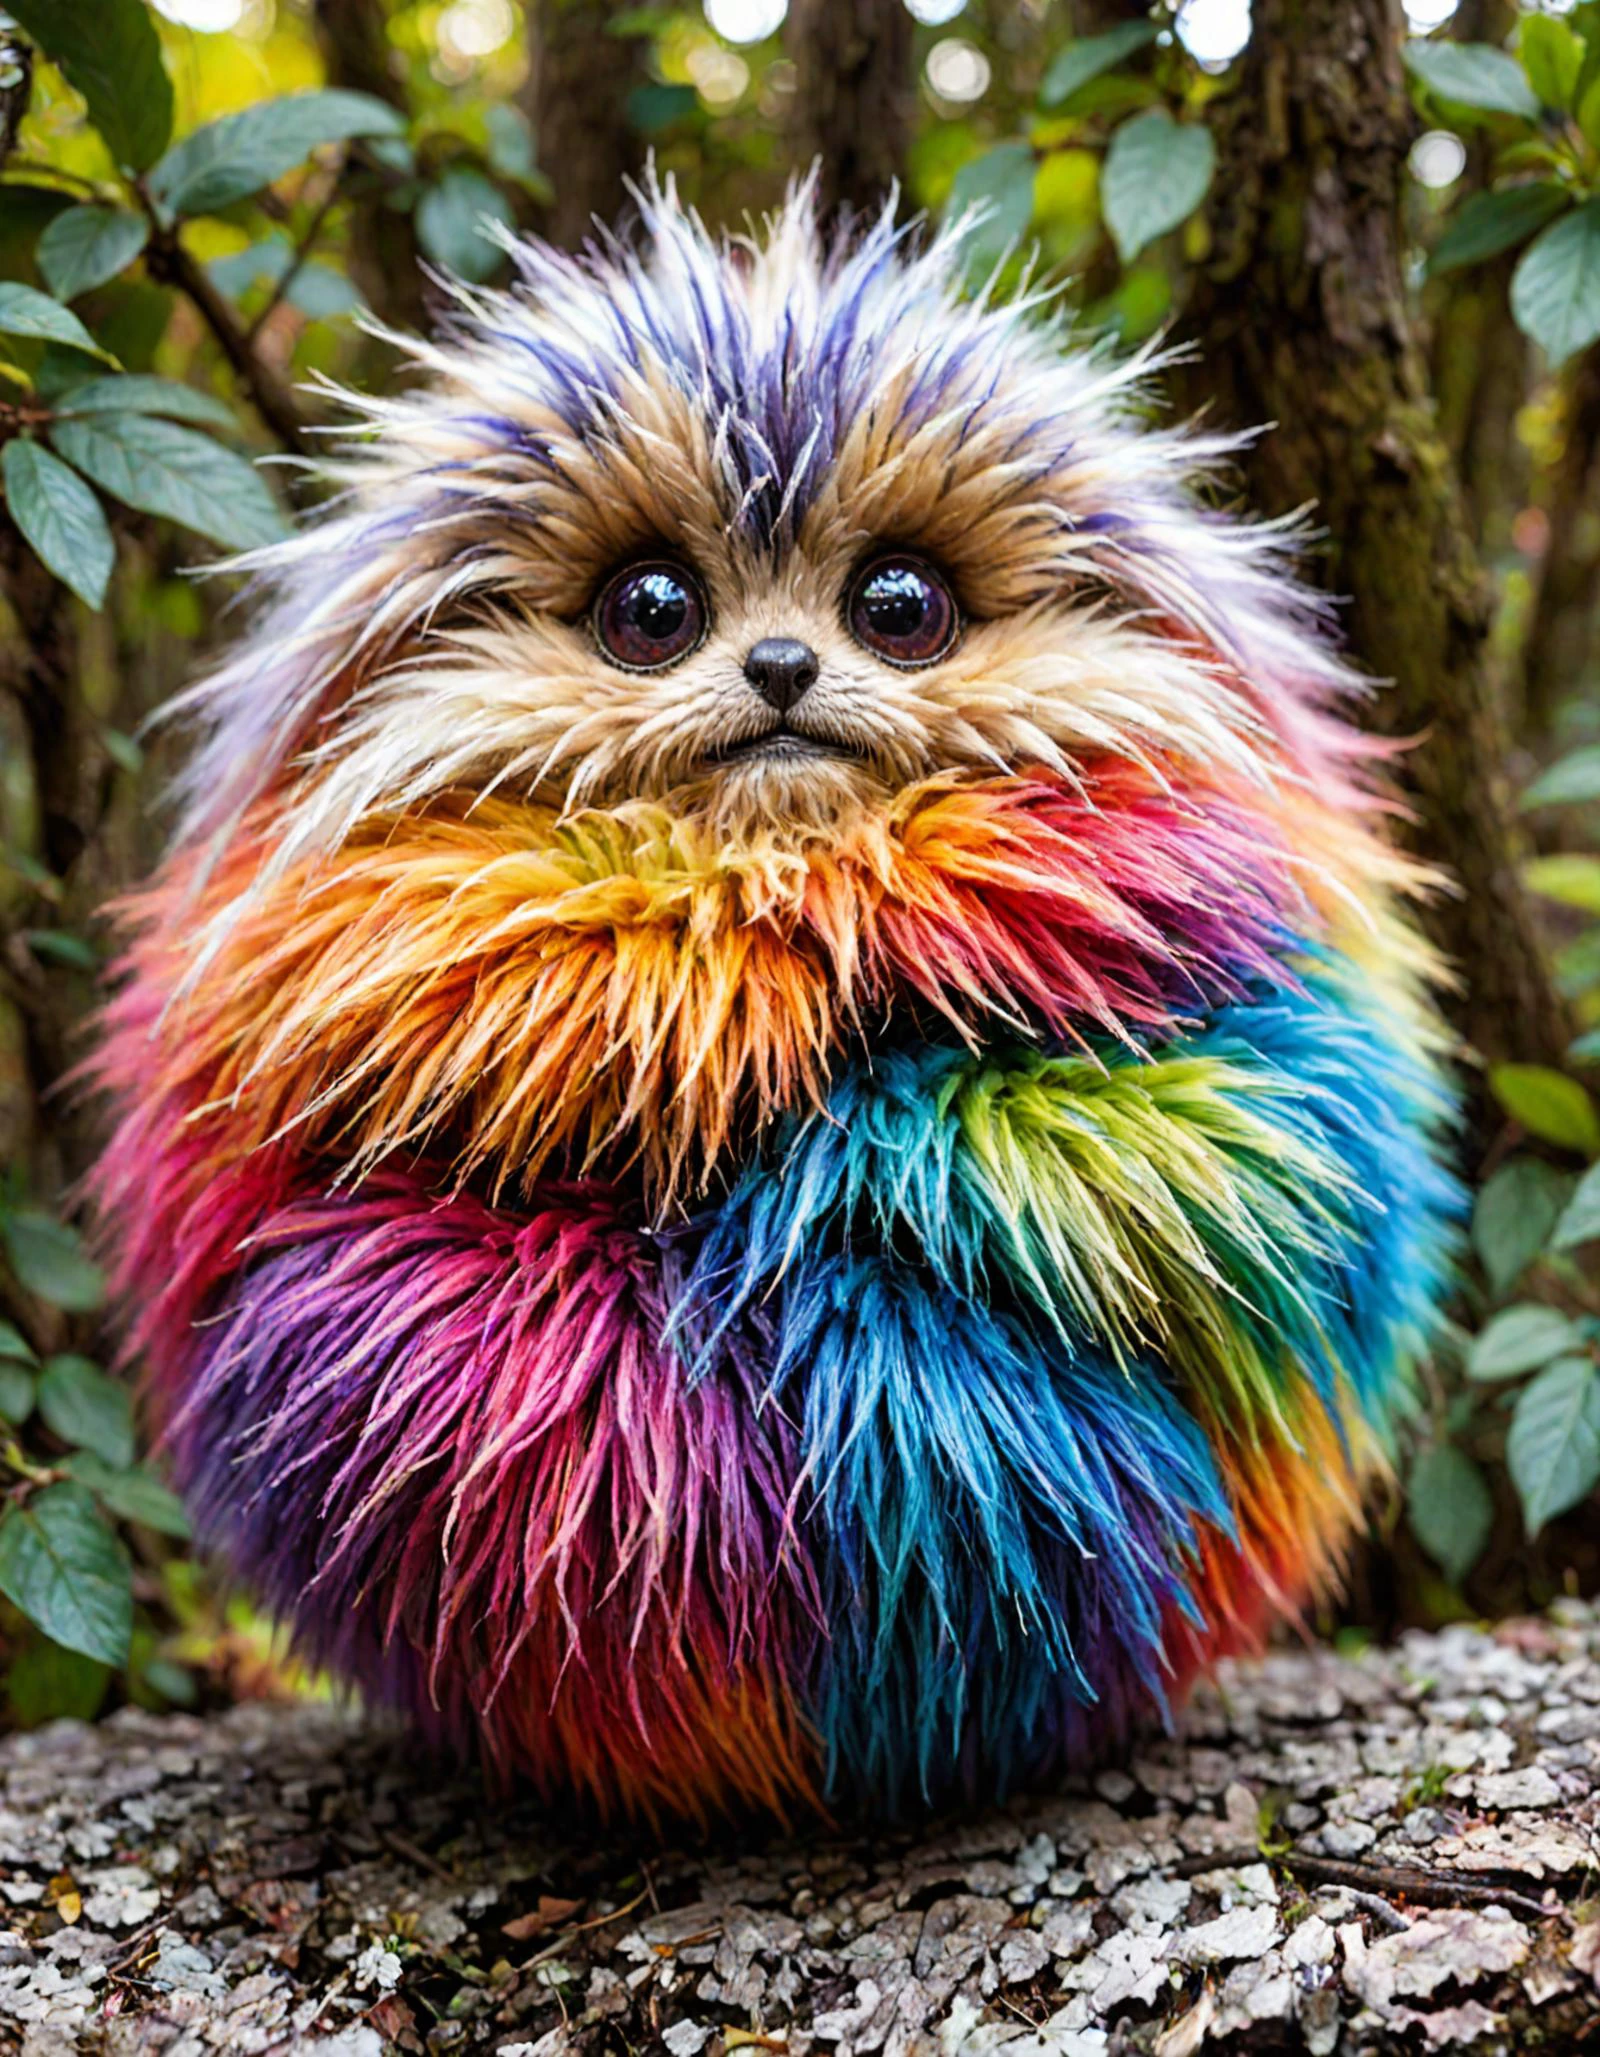 award winning photograph, colorful spherical furry fluffy soft fuzzy arboreal cryptid, adorable, cute, round, spherical, tiny [:style of larry elmore, style of Mattias Adolfsson:0.4]  